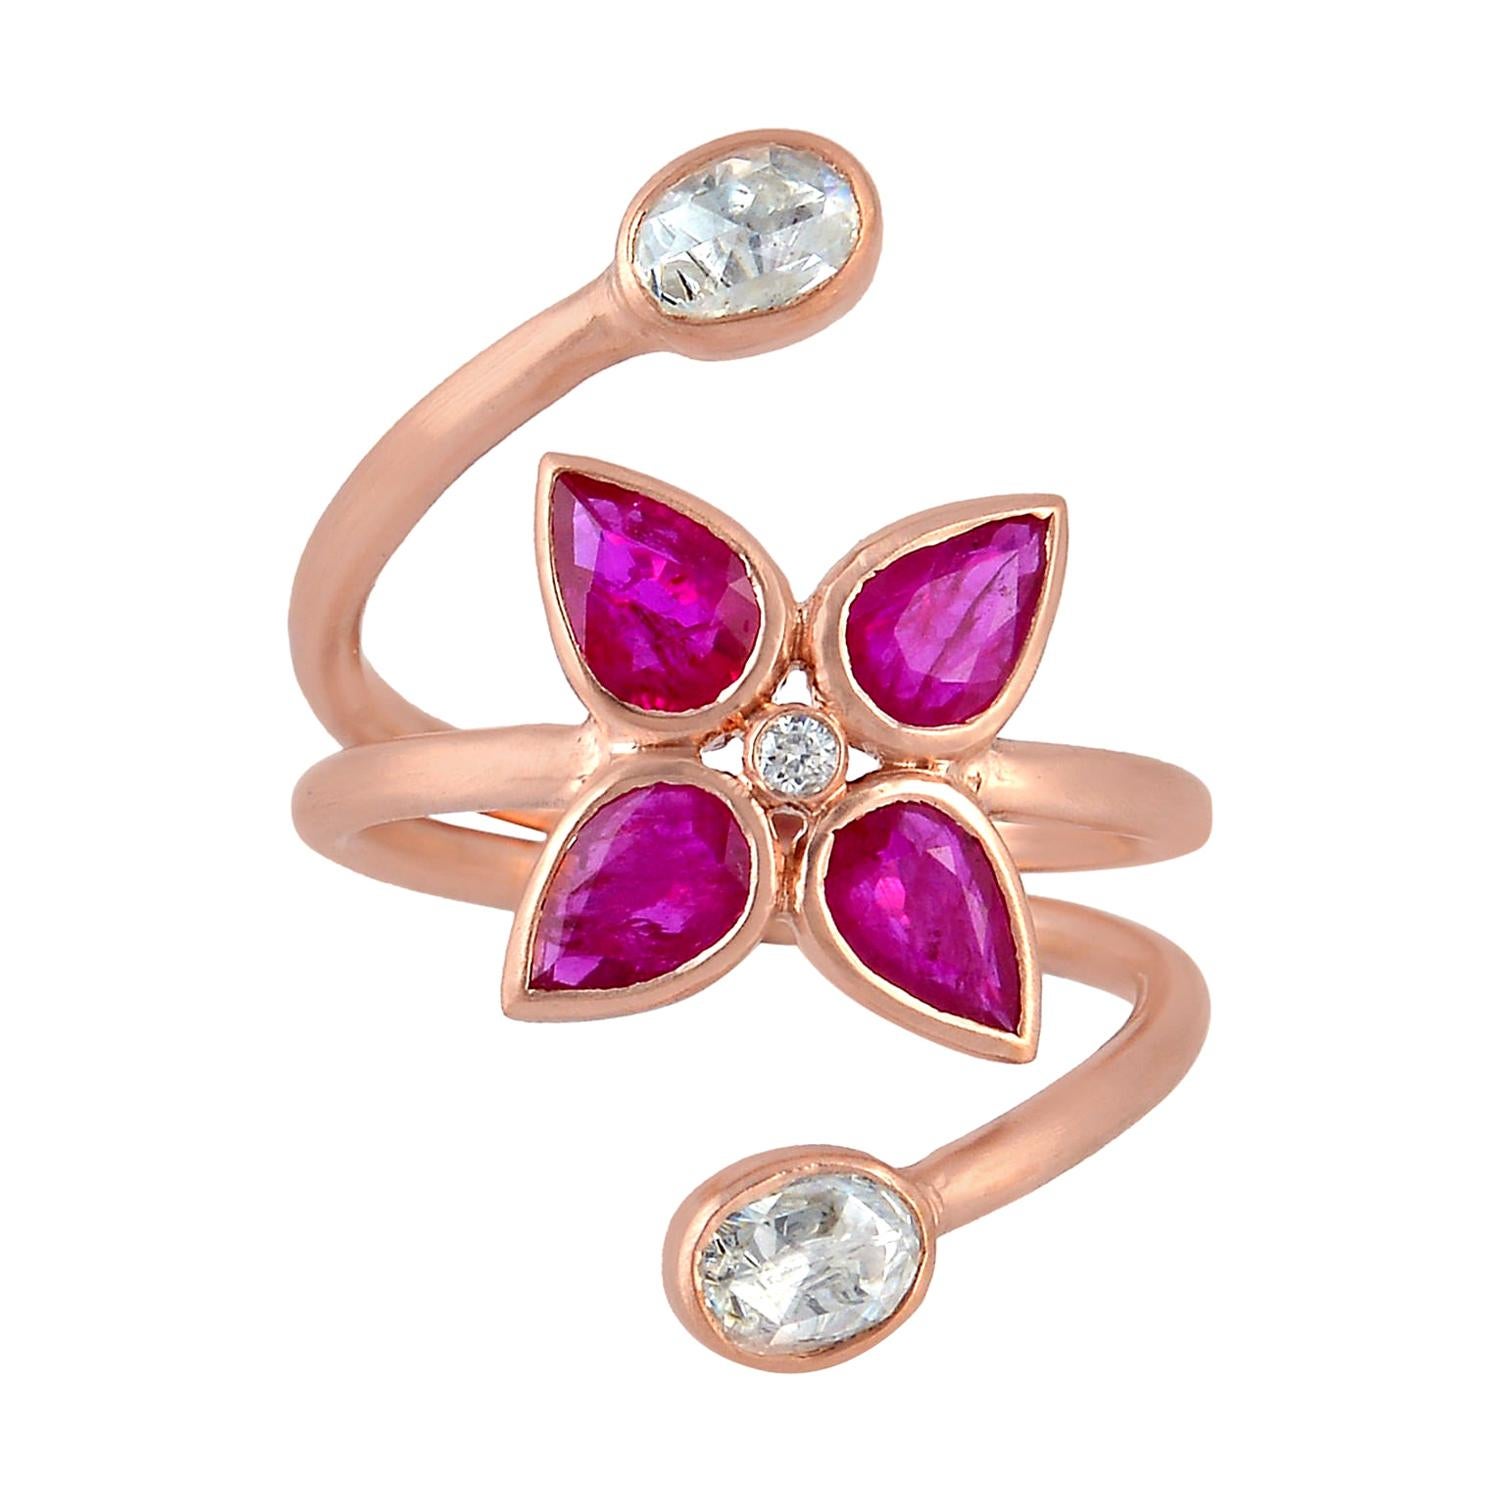 Floral Design Ruby and Diamond Ring Set in 18k Gold